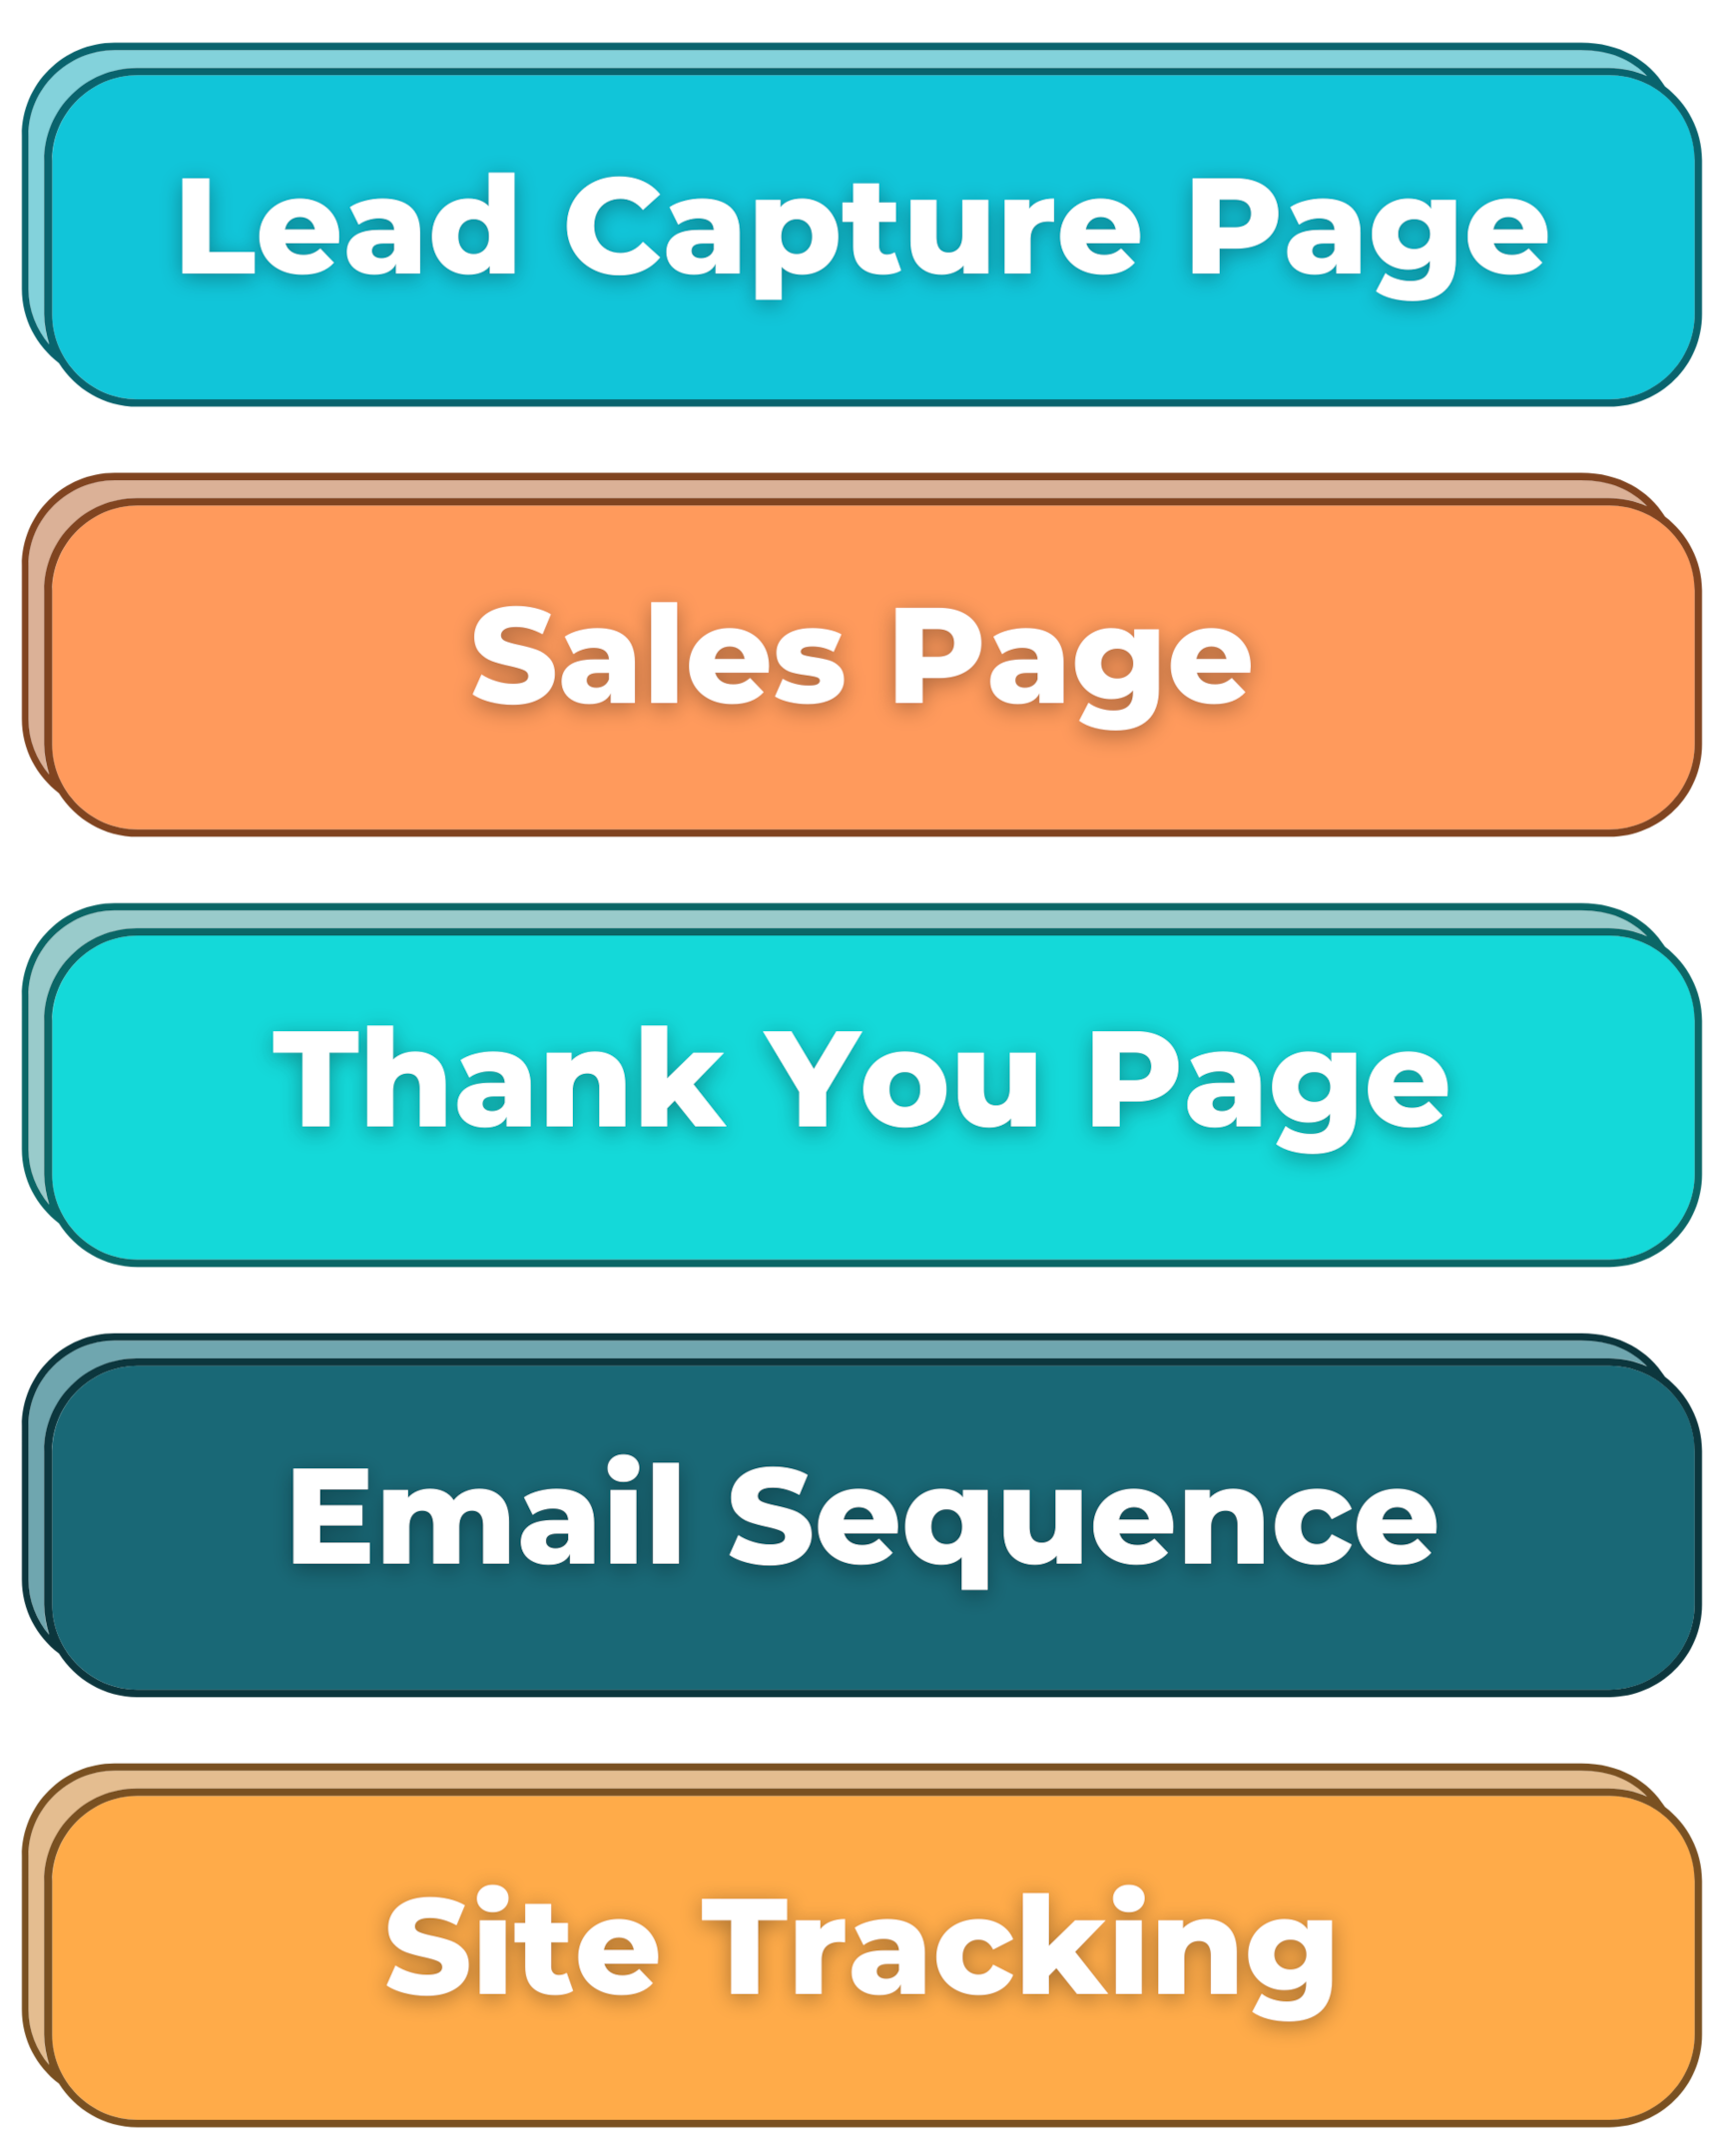 A few key components to a sales funnel